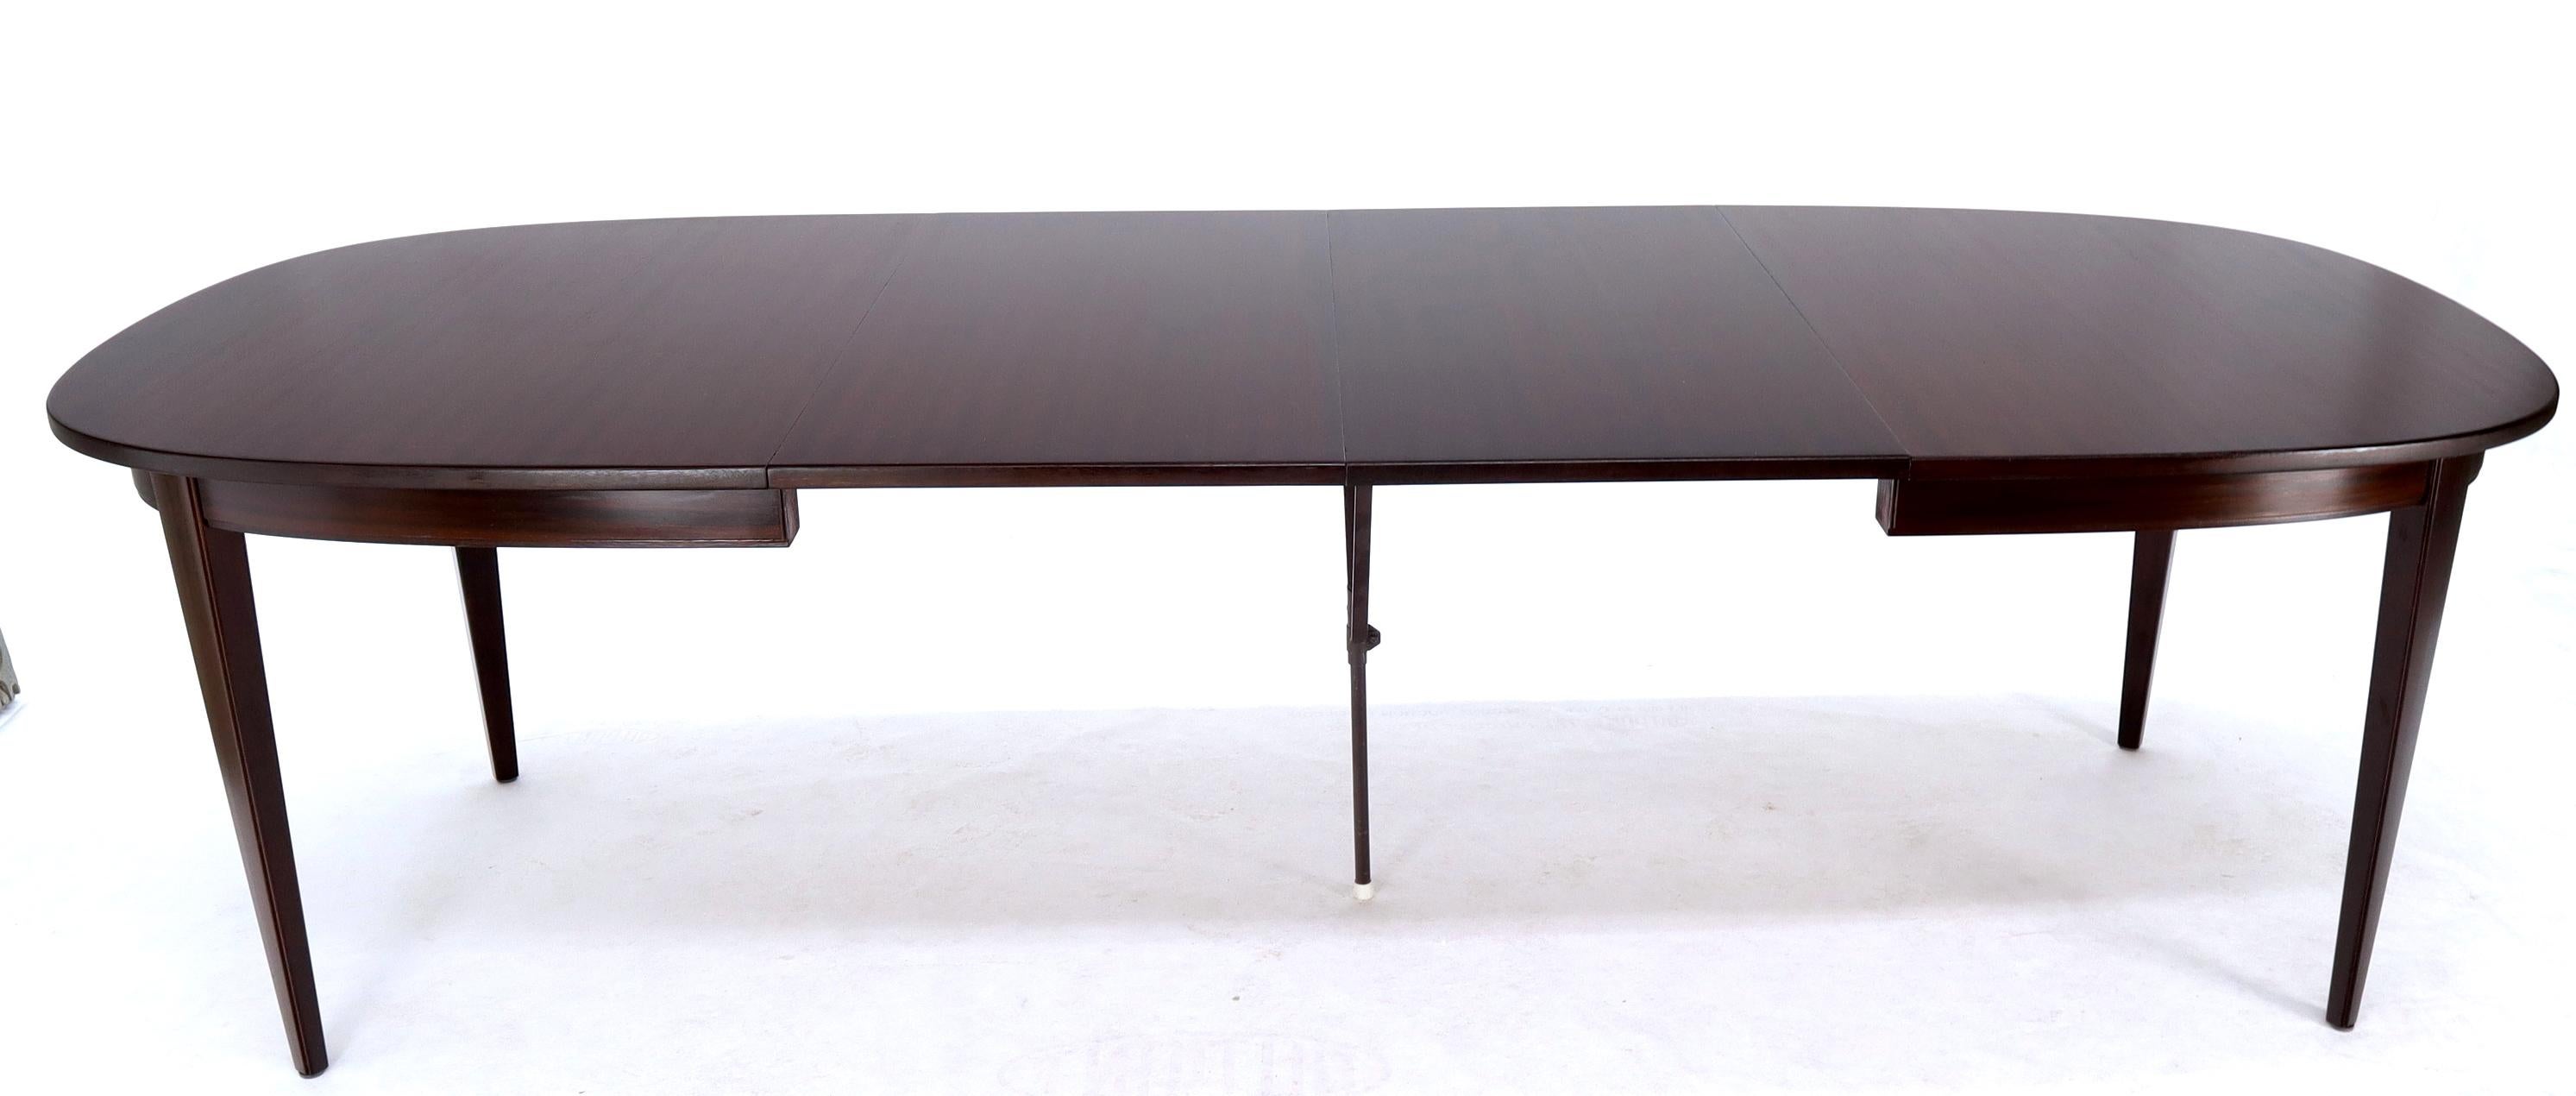 Danish Mid-Century Modern oval dining table by Omann Jun. 
Espresso mahogany finish. Comes with 2 X 20